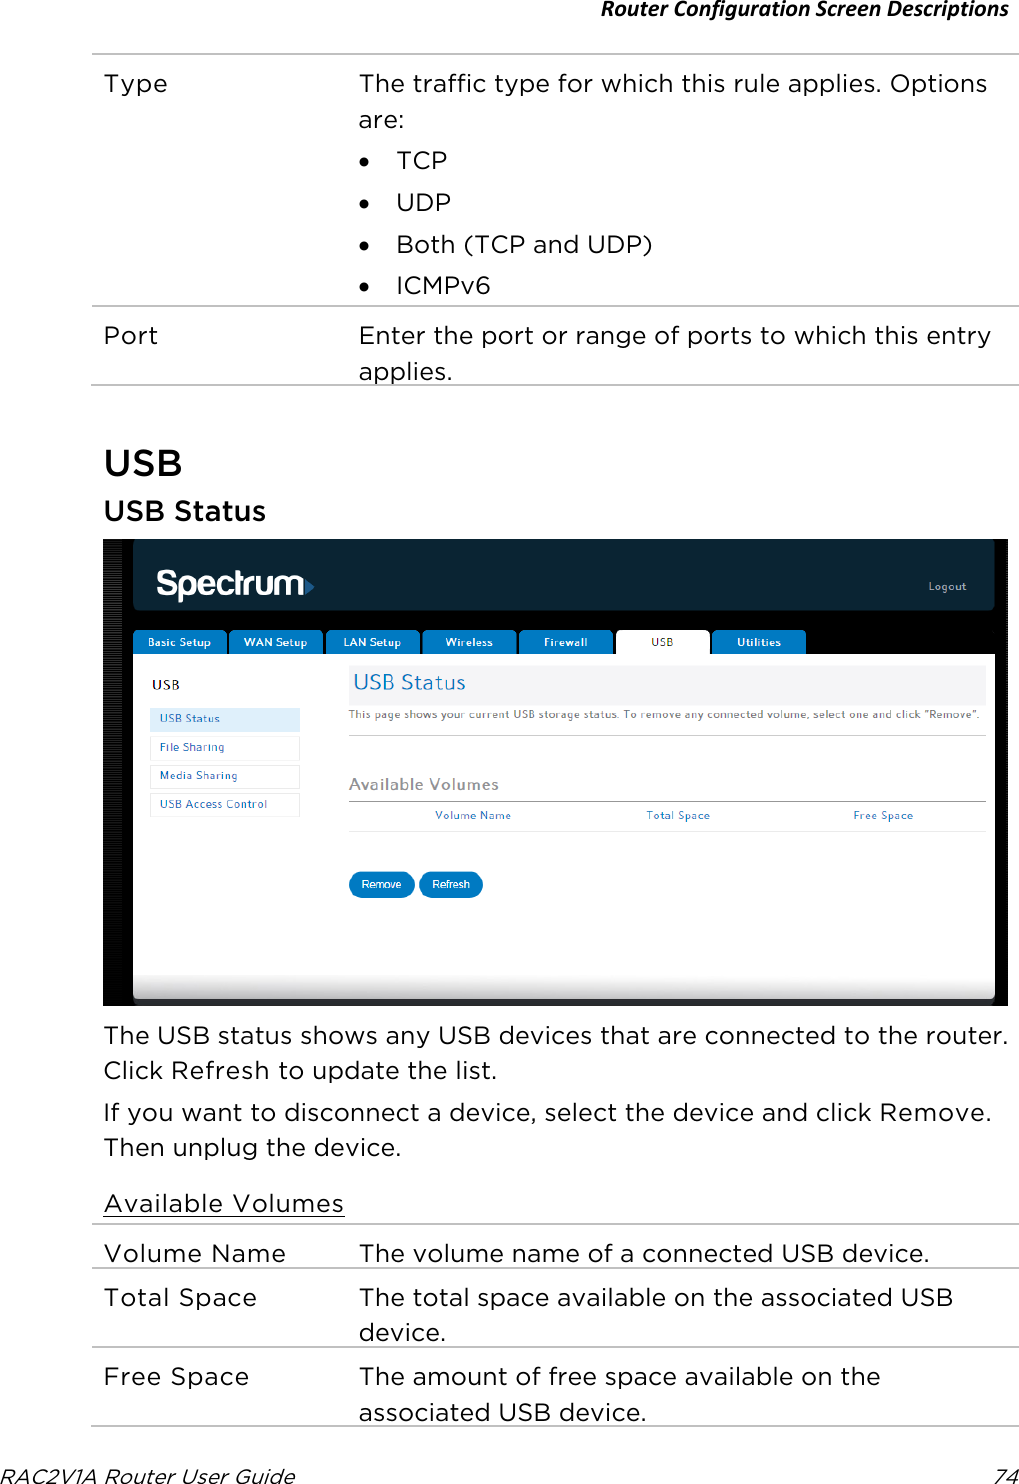 Router Configuration Screen Descriptions  RAC2V1A Router User Guide 74  Type The traffic type for which this rule applies. Options are: • TCP • UDP • Both (TCP and UDP) • ICMPv6 Port Enter the port or range of ports to which this entry applies.    USB USB Status  The USB status shows any USB devices that are connected to the router. Click Refresh to update the list.  If you want to disconnect a device, select the device and click Remove. Then unplug the device. Available Volumes Volume Name The volume name of a connected USB device. Total Space The total space available on the associated USB device. Free Space The amount of free space available on the associated USB device.   